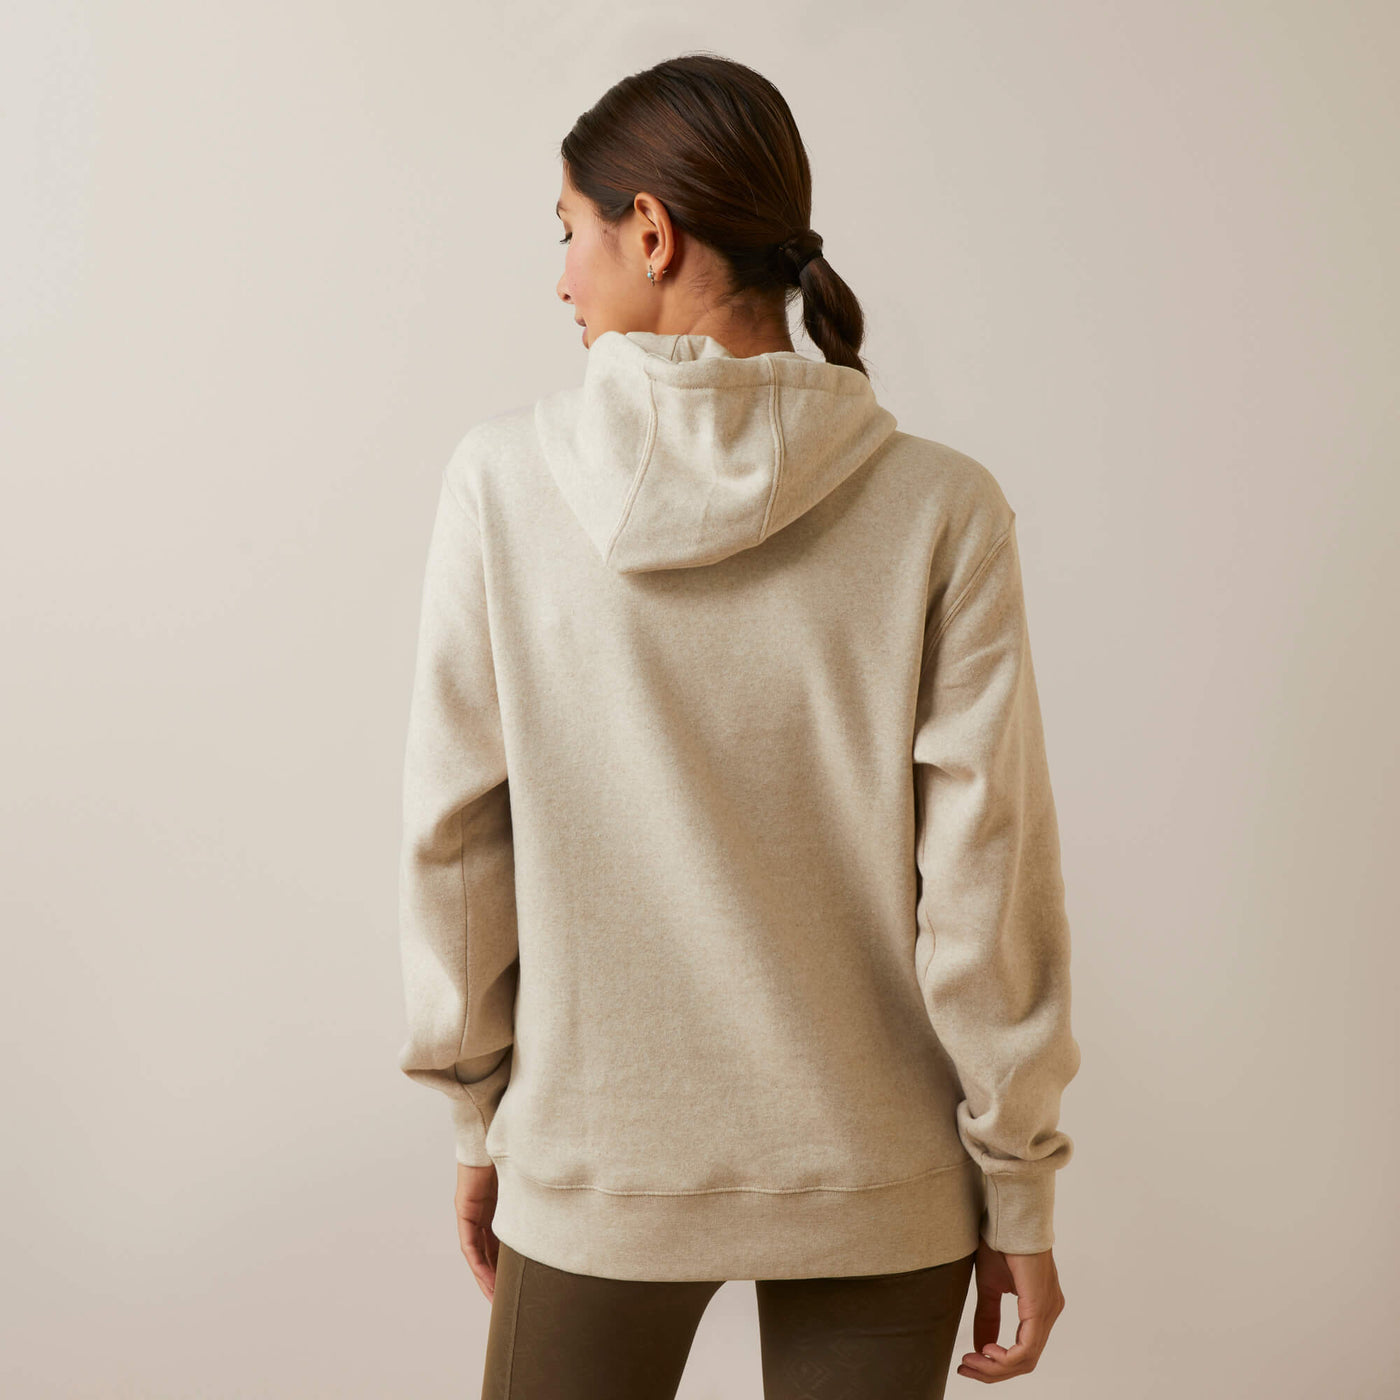 Ariat Women's REAL Oatmeal Heather Ombre Shield Hoodie